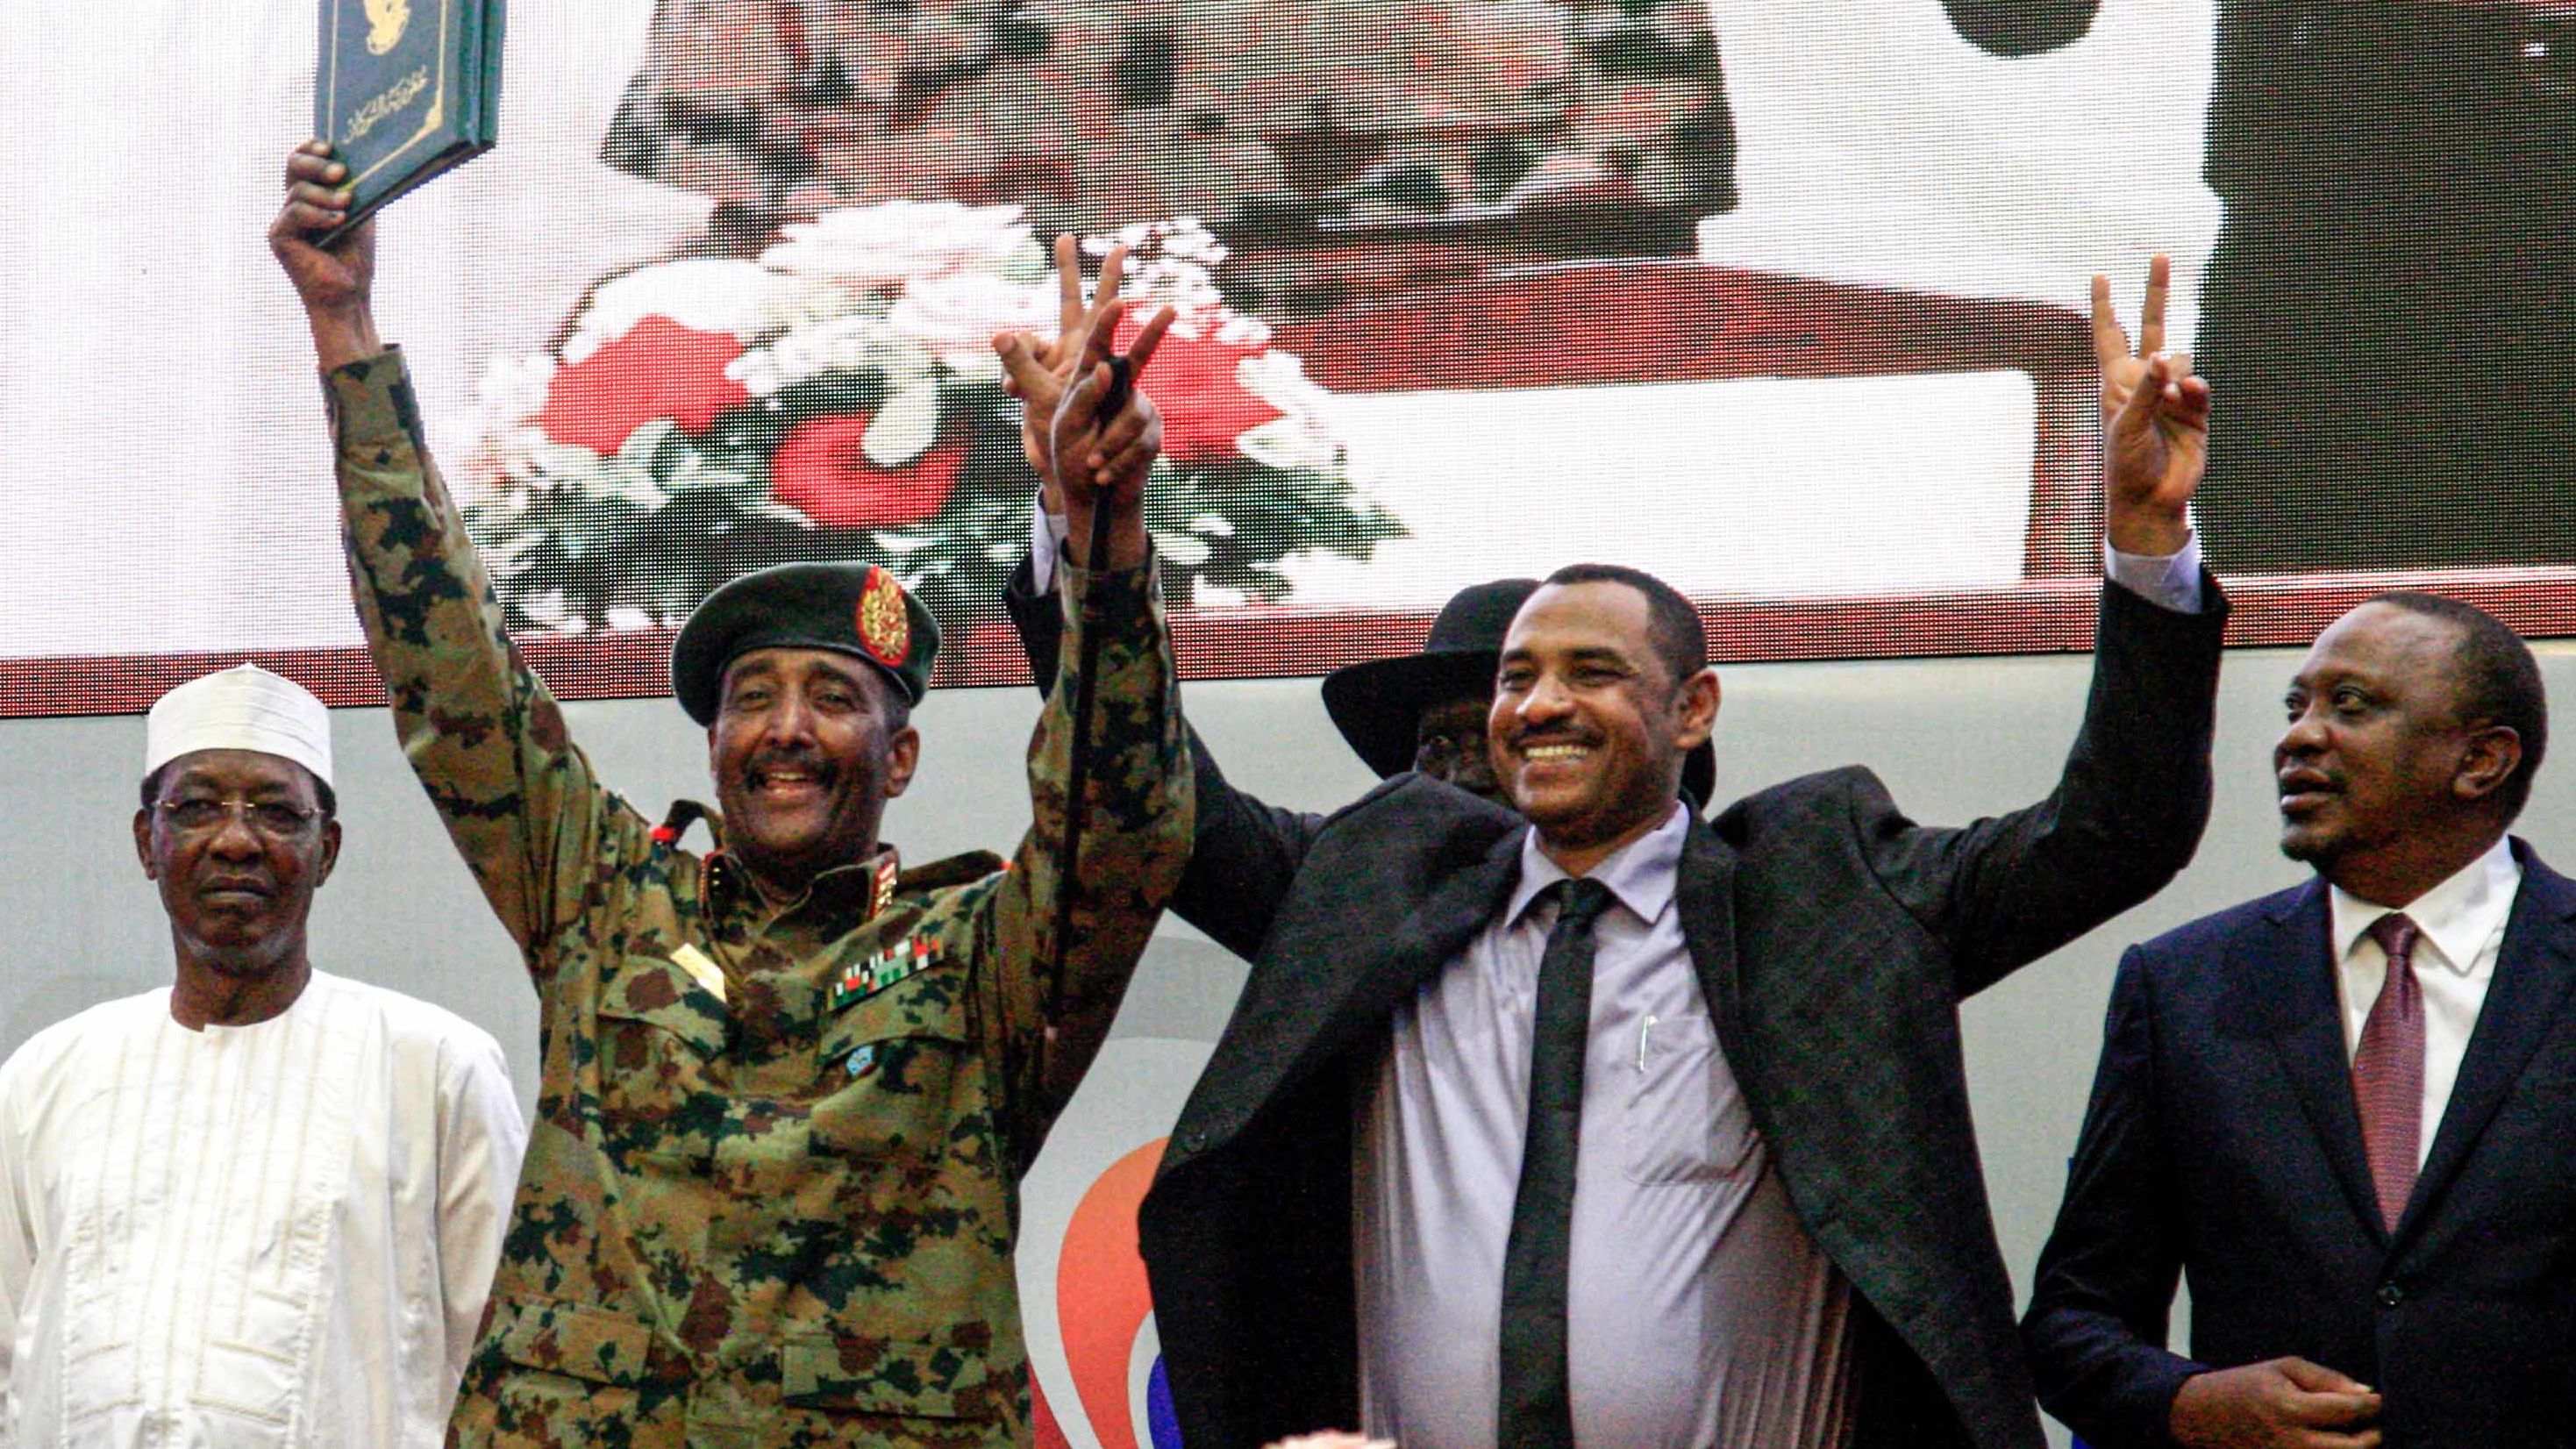 Sudanese protest leader Ahmad Rabie, center right, flashes the victory gesture alongside Gen. Abdel Fattah al-Burhan, the chief of Sudan's ruling Transitional Military Council, center left, during a ceremony where they signed a constitutional declaration.